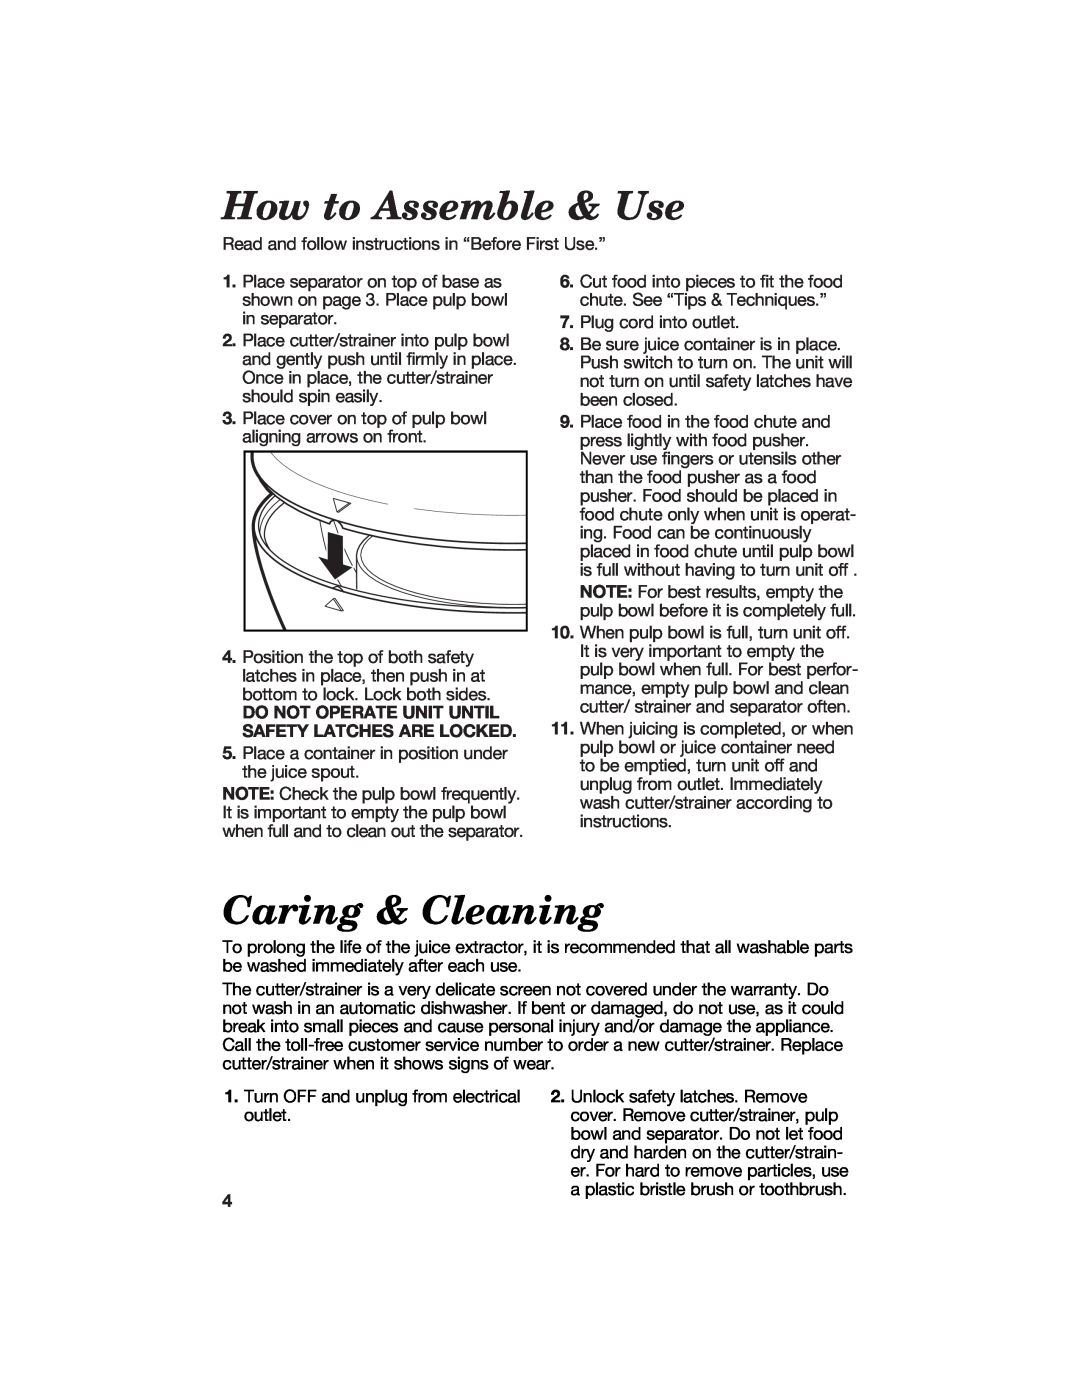 Hamilton Beach 840097100 manual How to Assemble & Use, Caring & Cleaning 